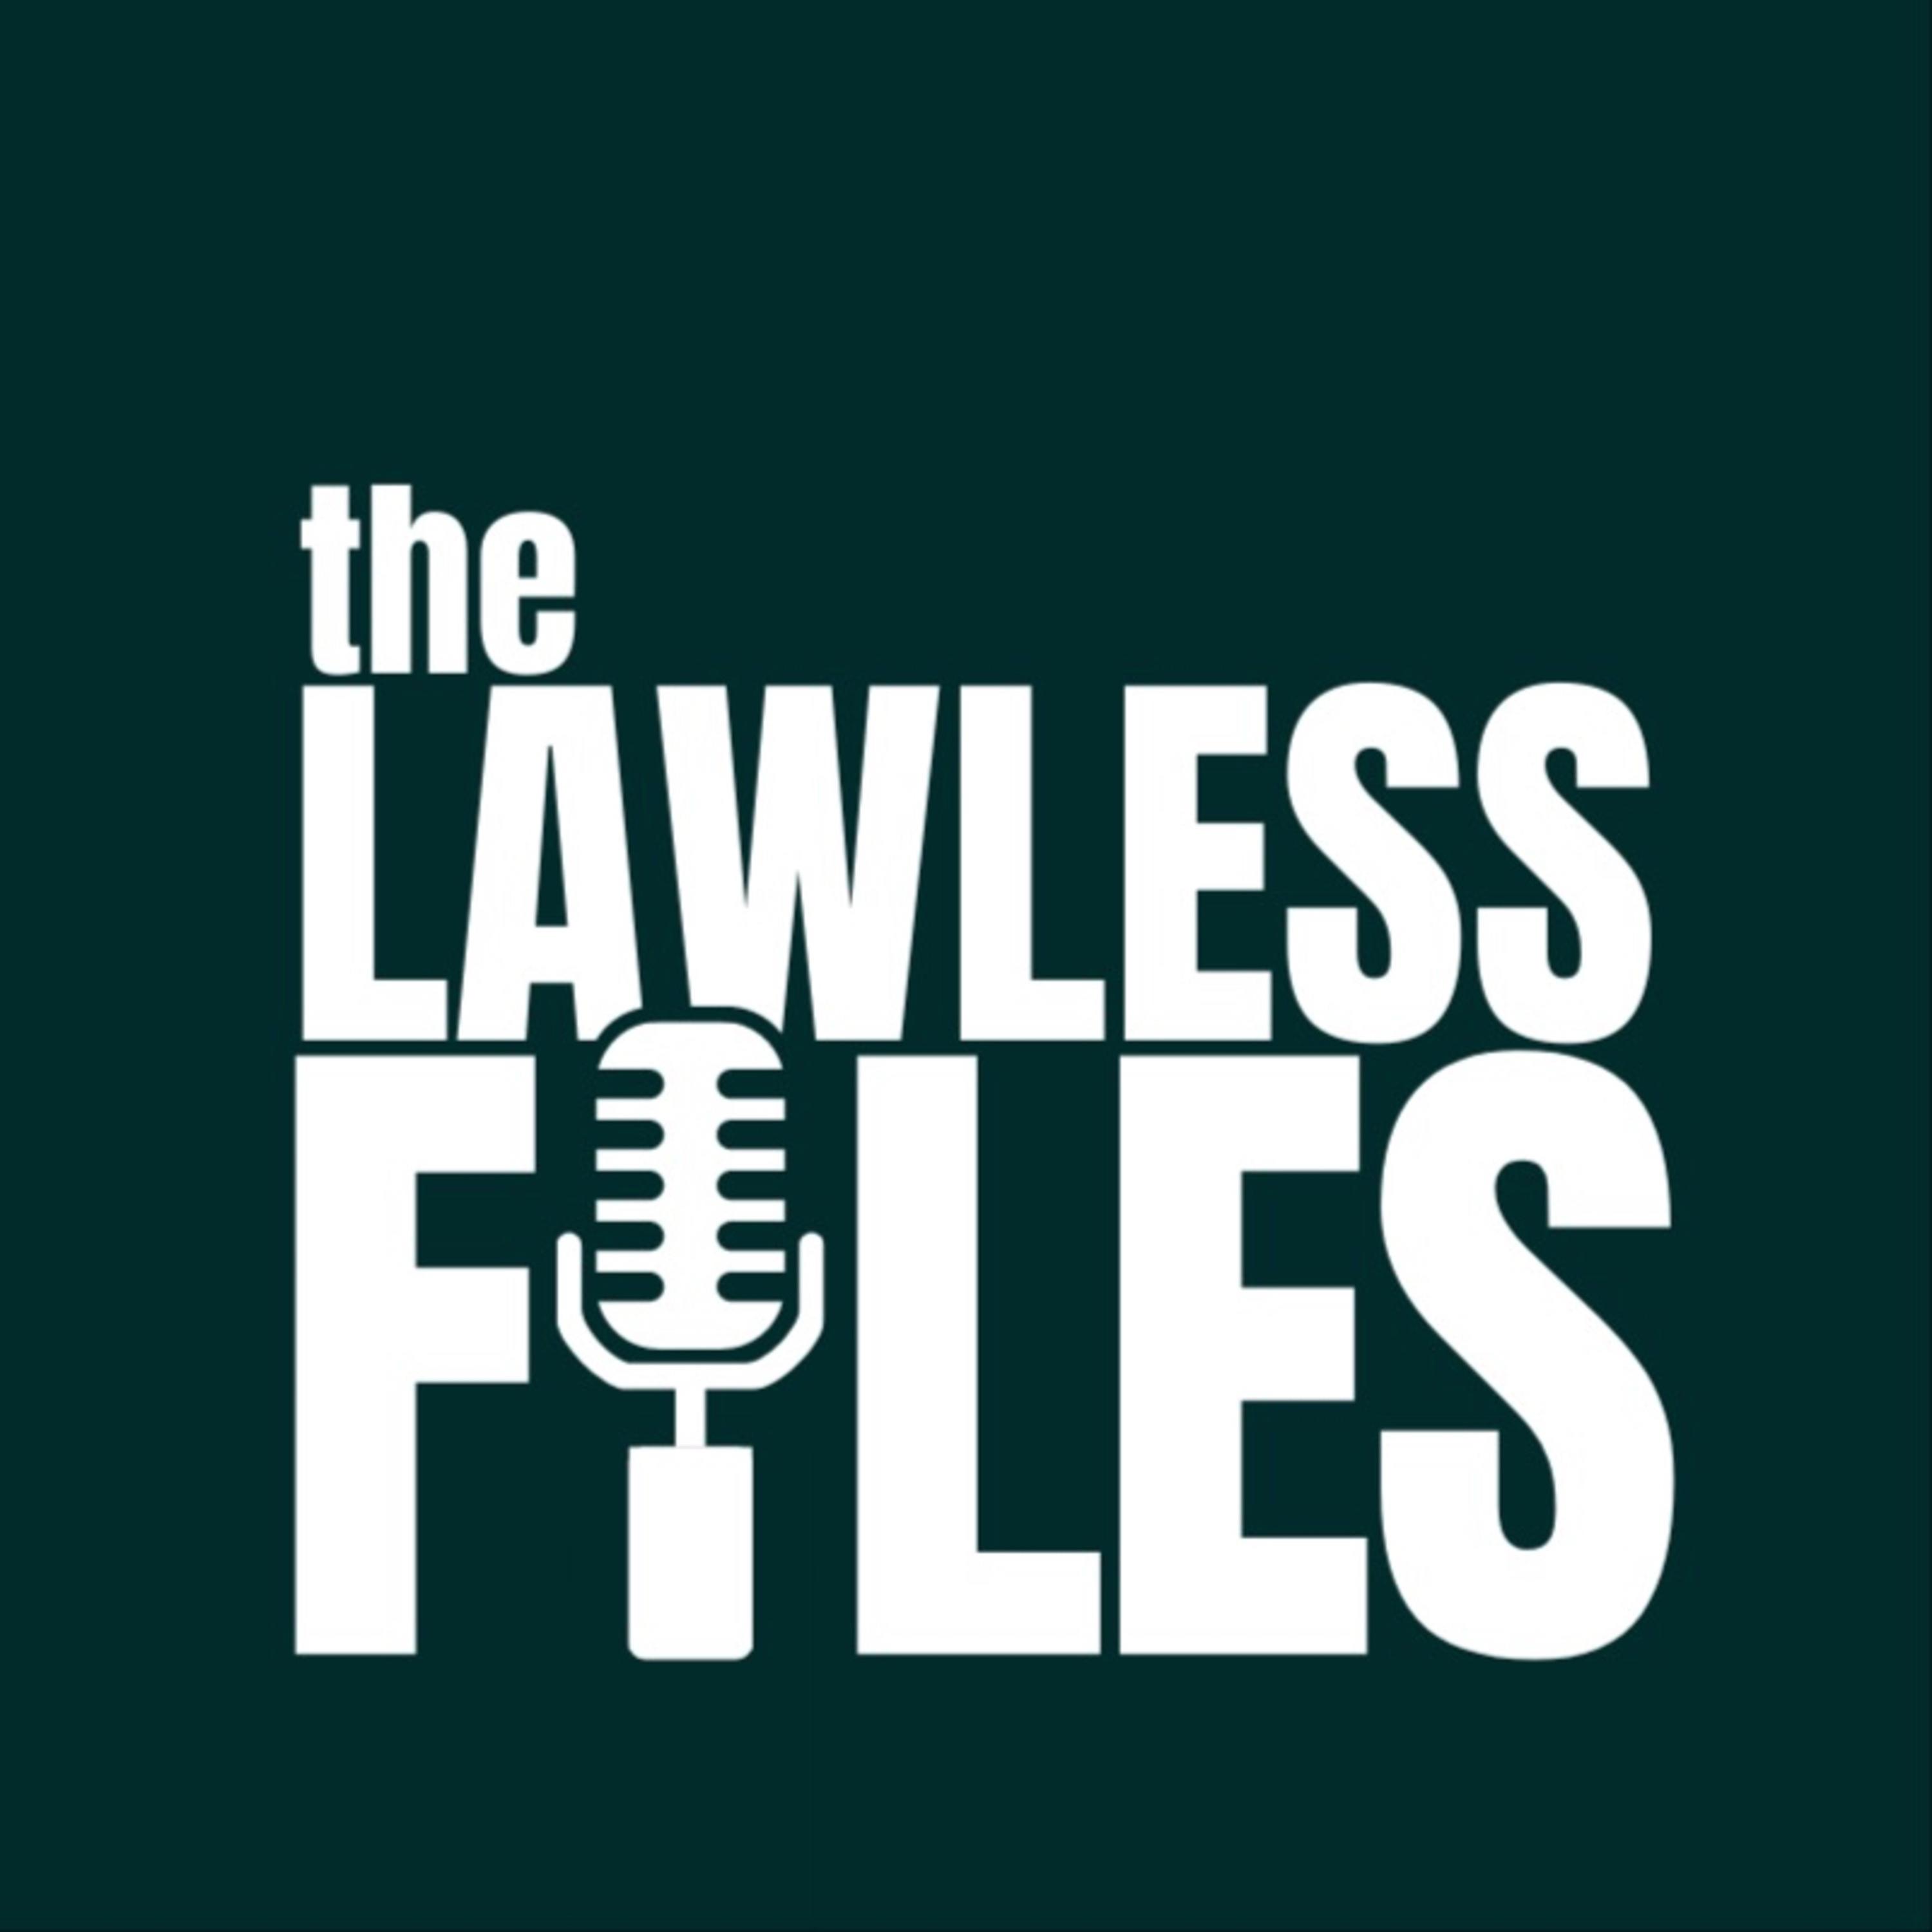 The Lawless Files